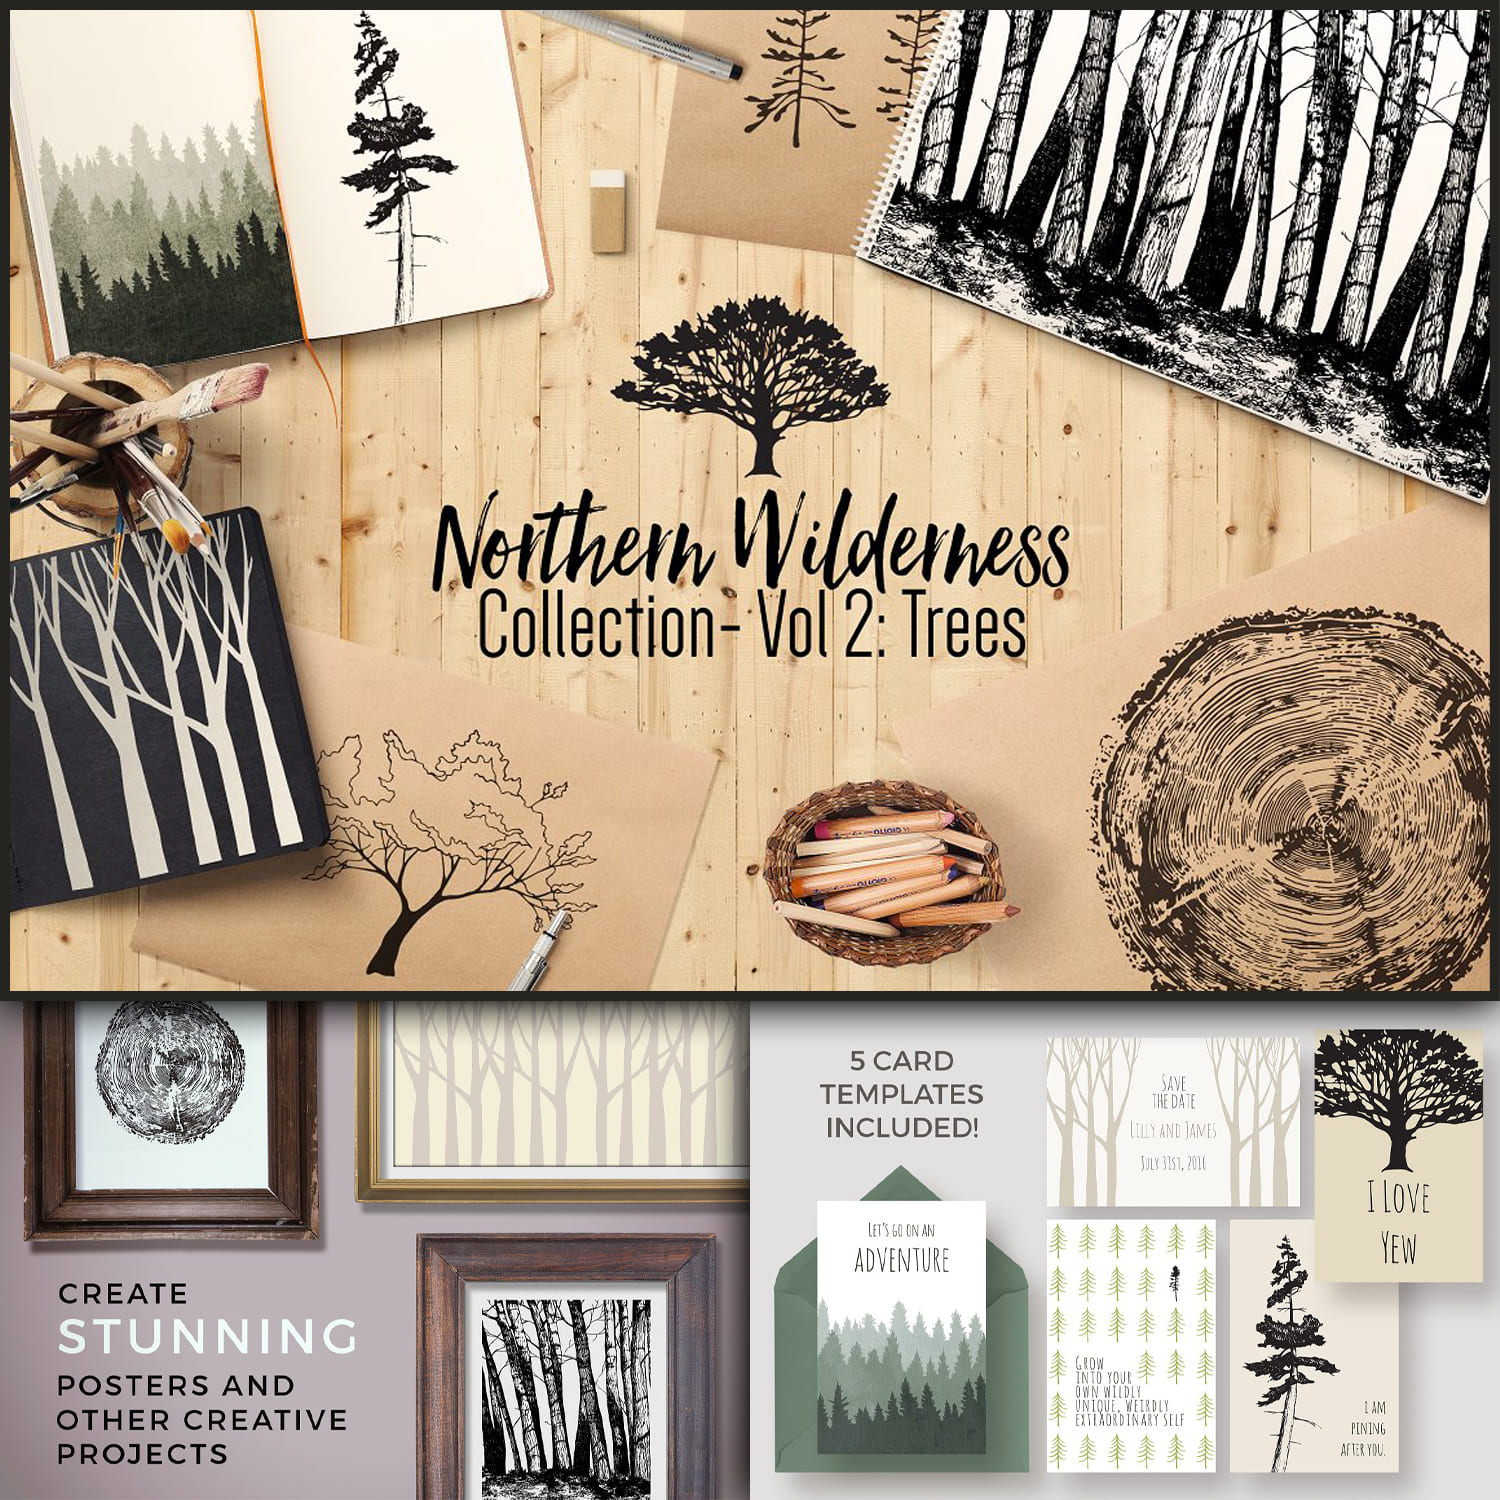 Three slides of the Northern Wilderness collection.